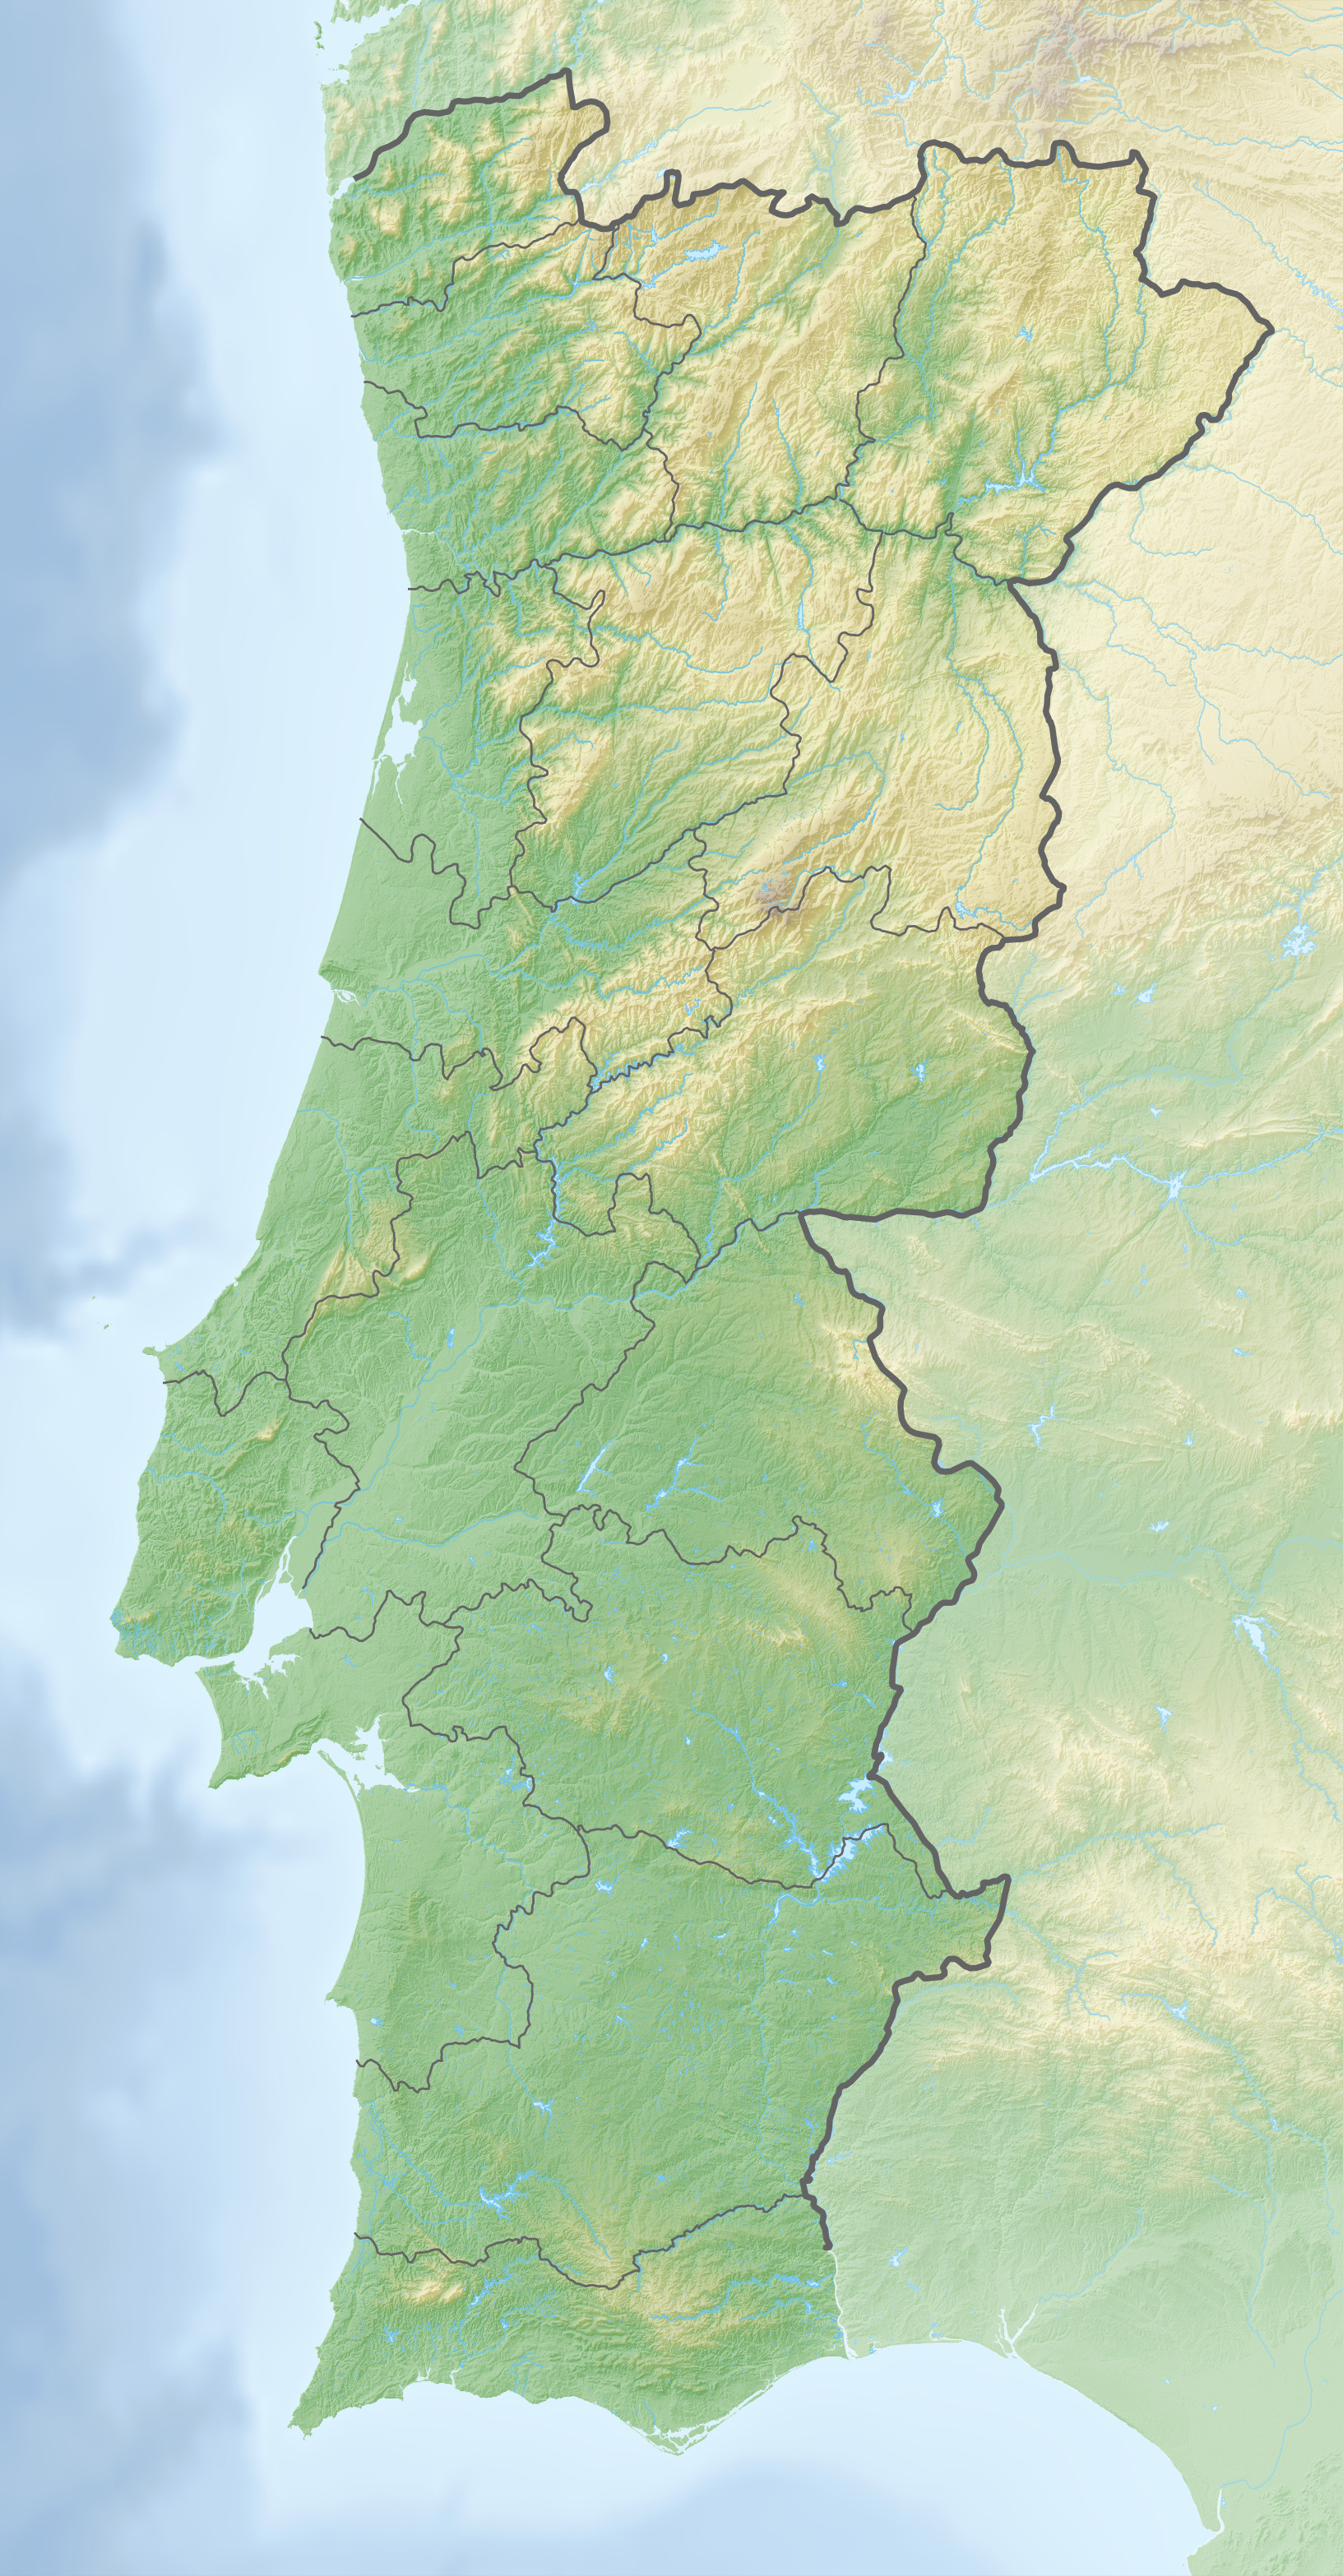 Where is Lisbon on Portugal map?